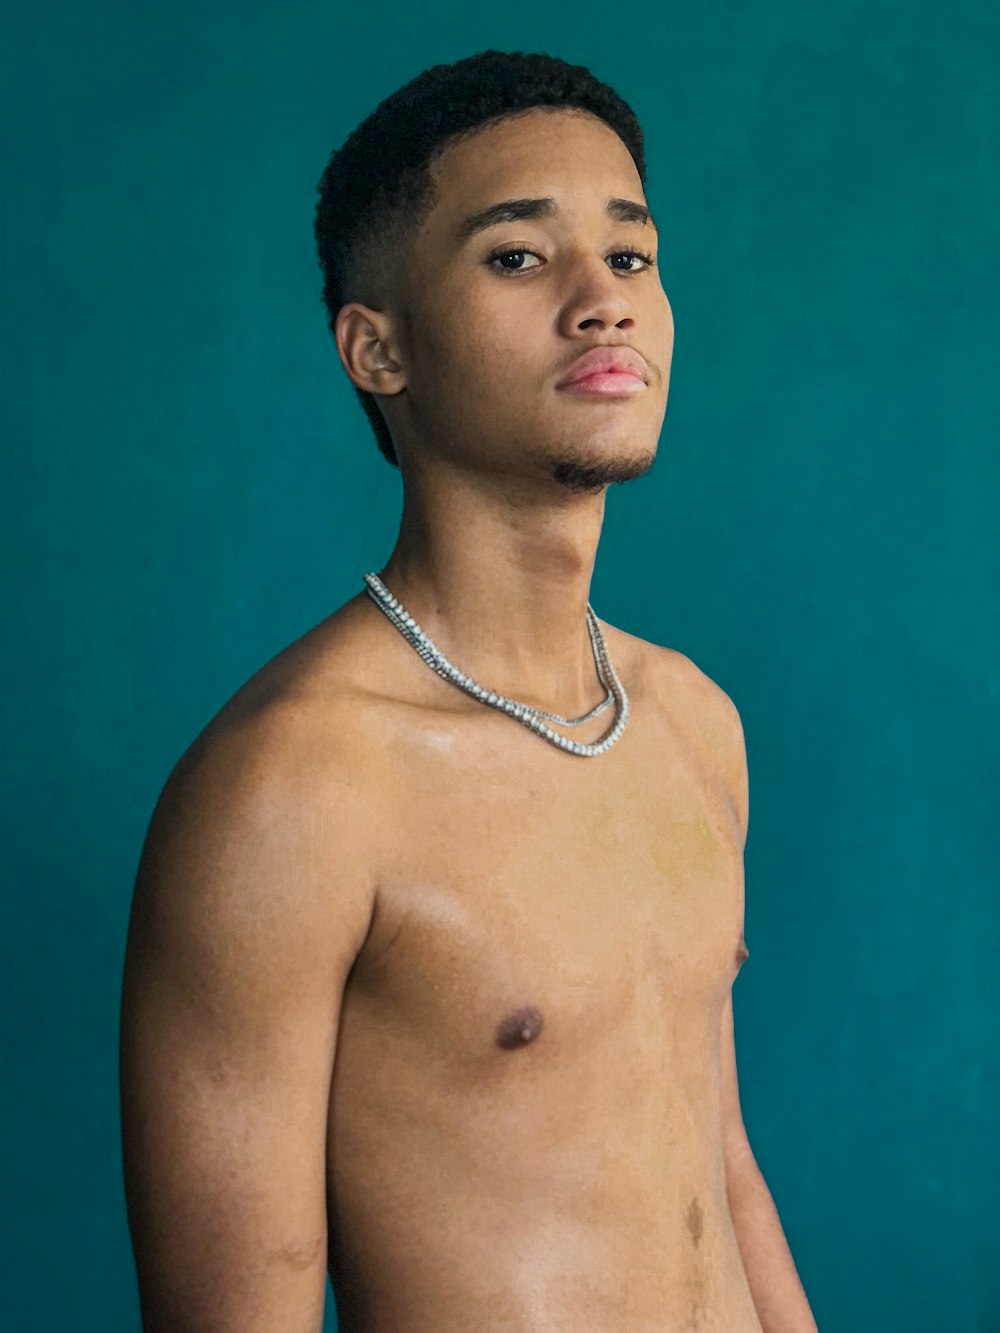 a shirtless young man wearing a chain around his neck